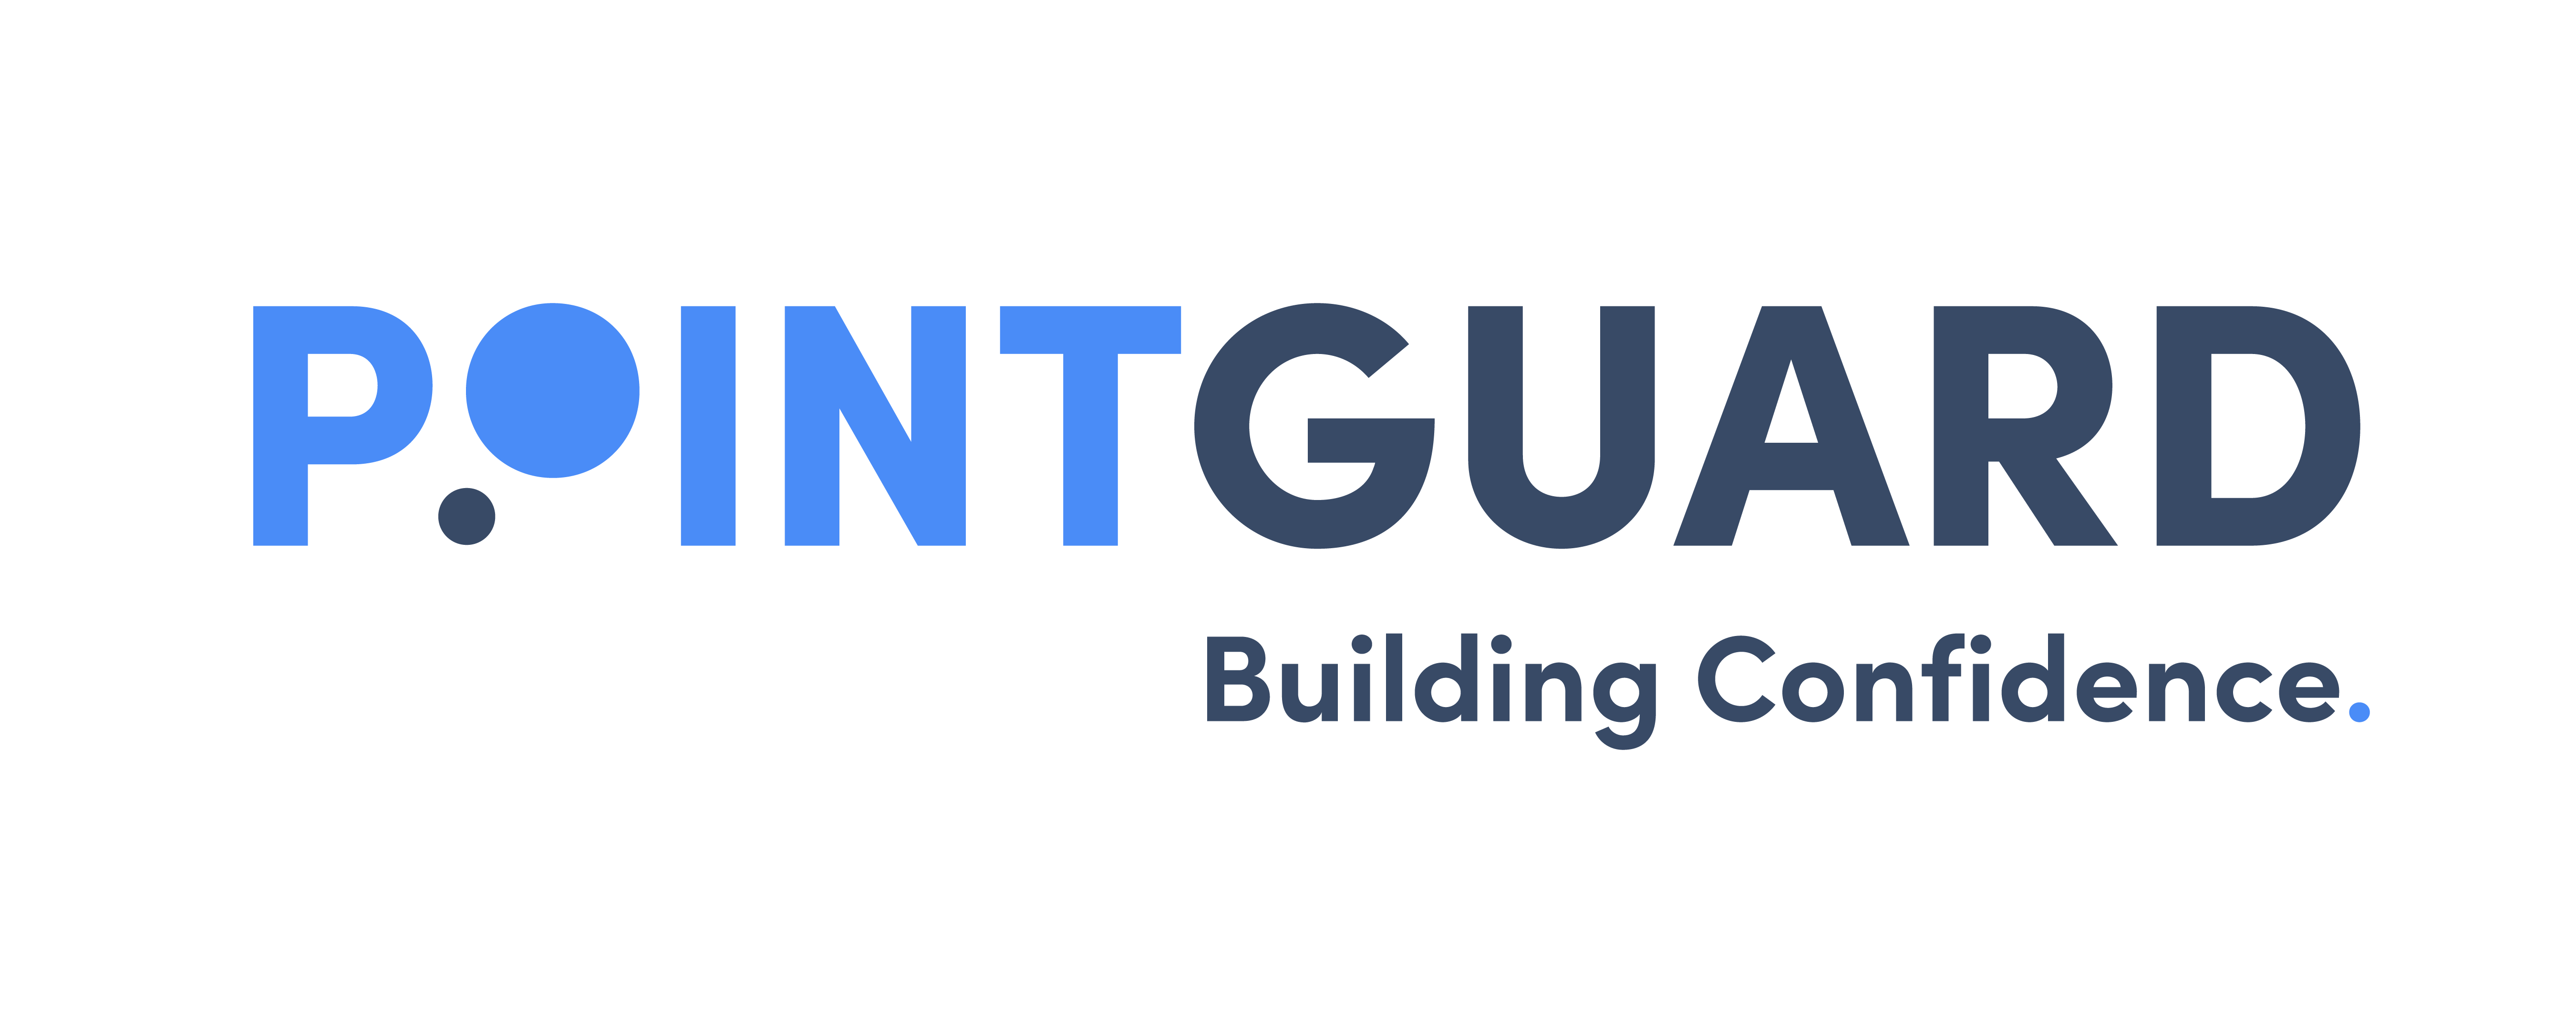 Welcome to PointGuard! Take a look at our latest video.